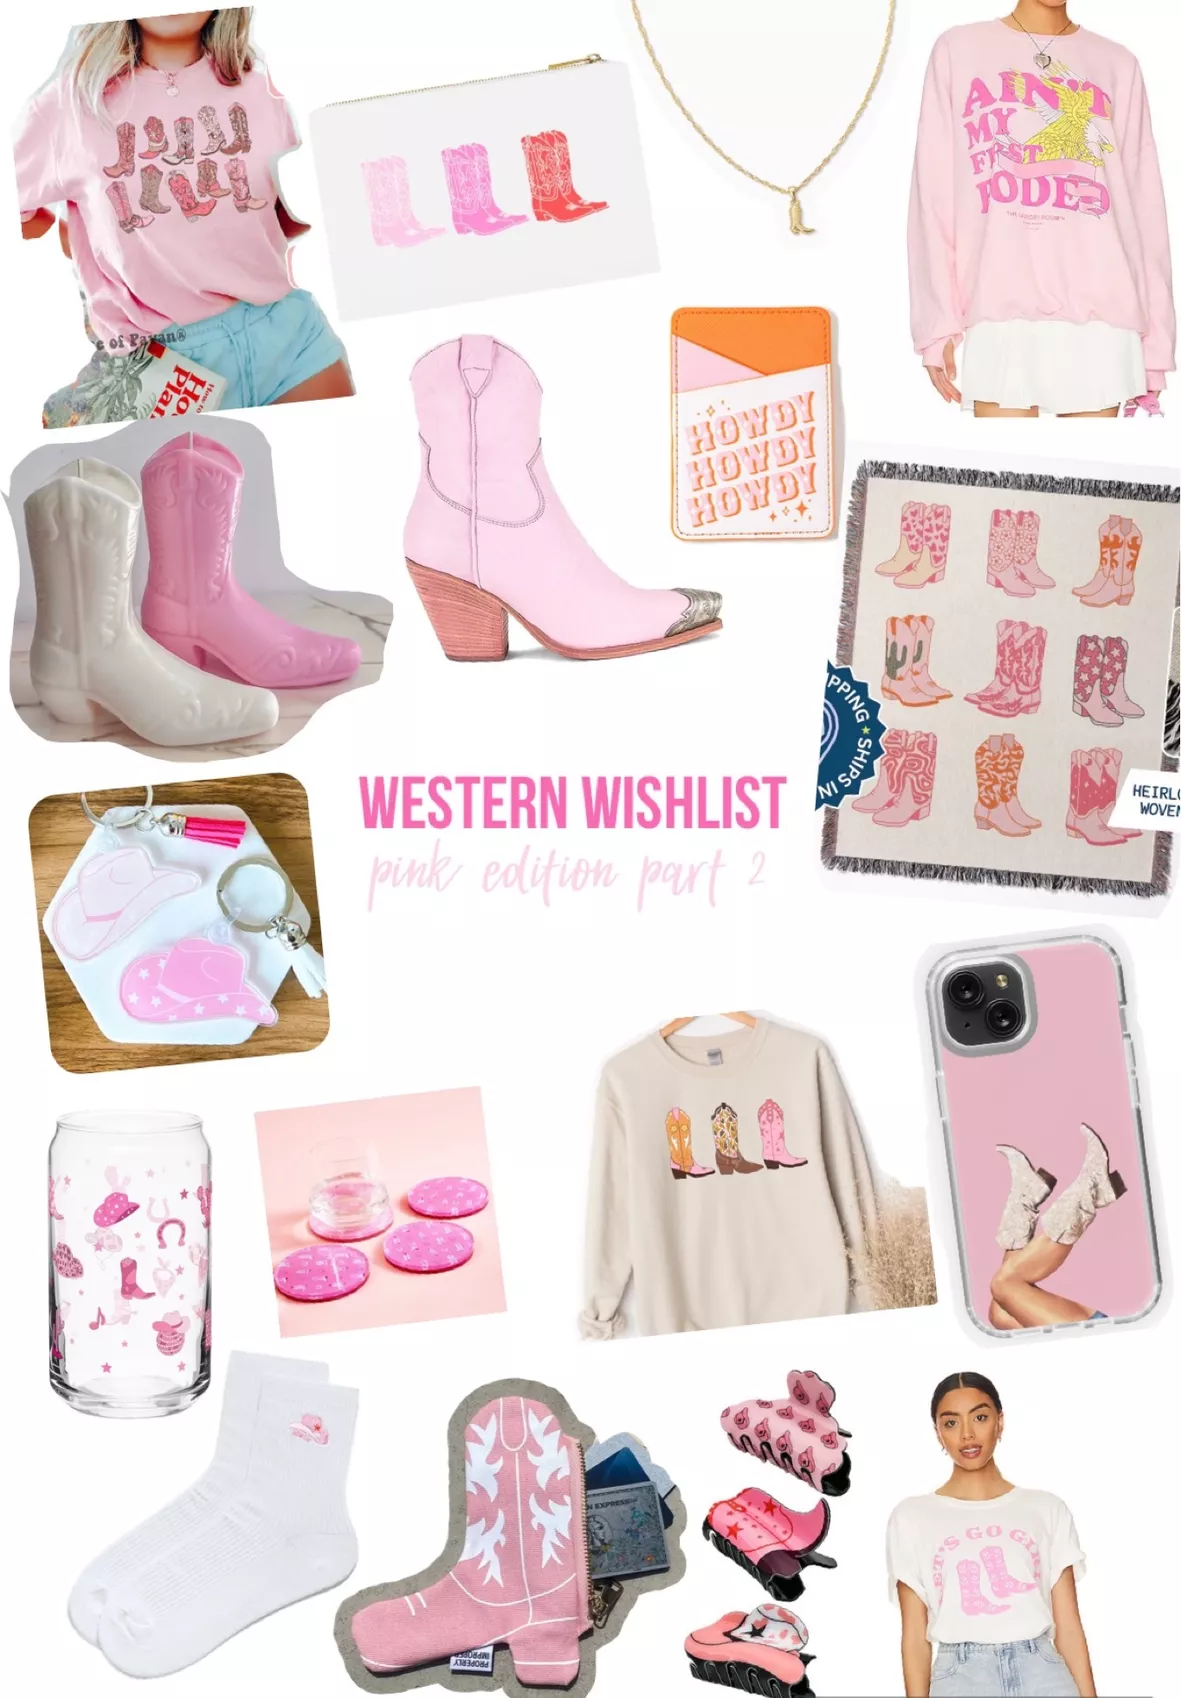 Brayden Western Boot in Rose curated on LTK